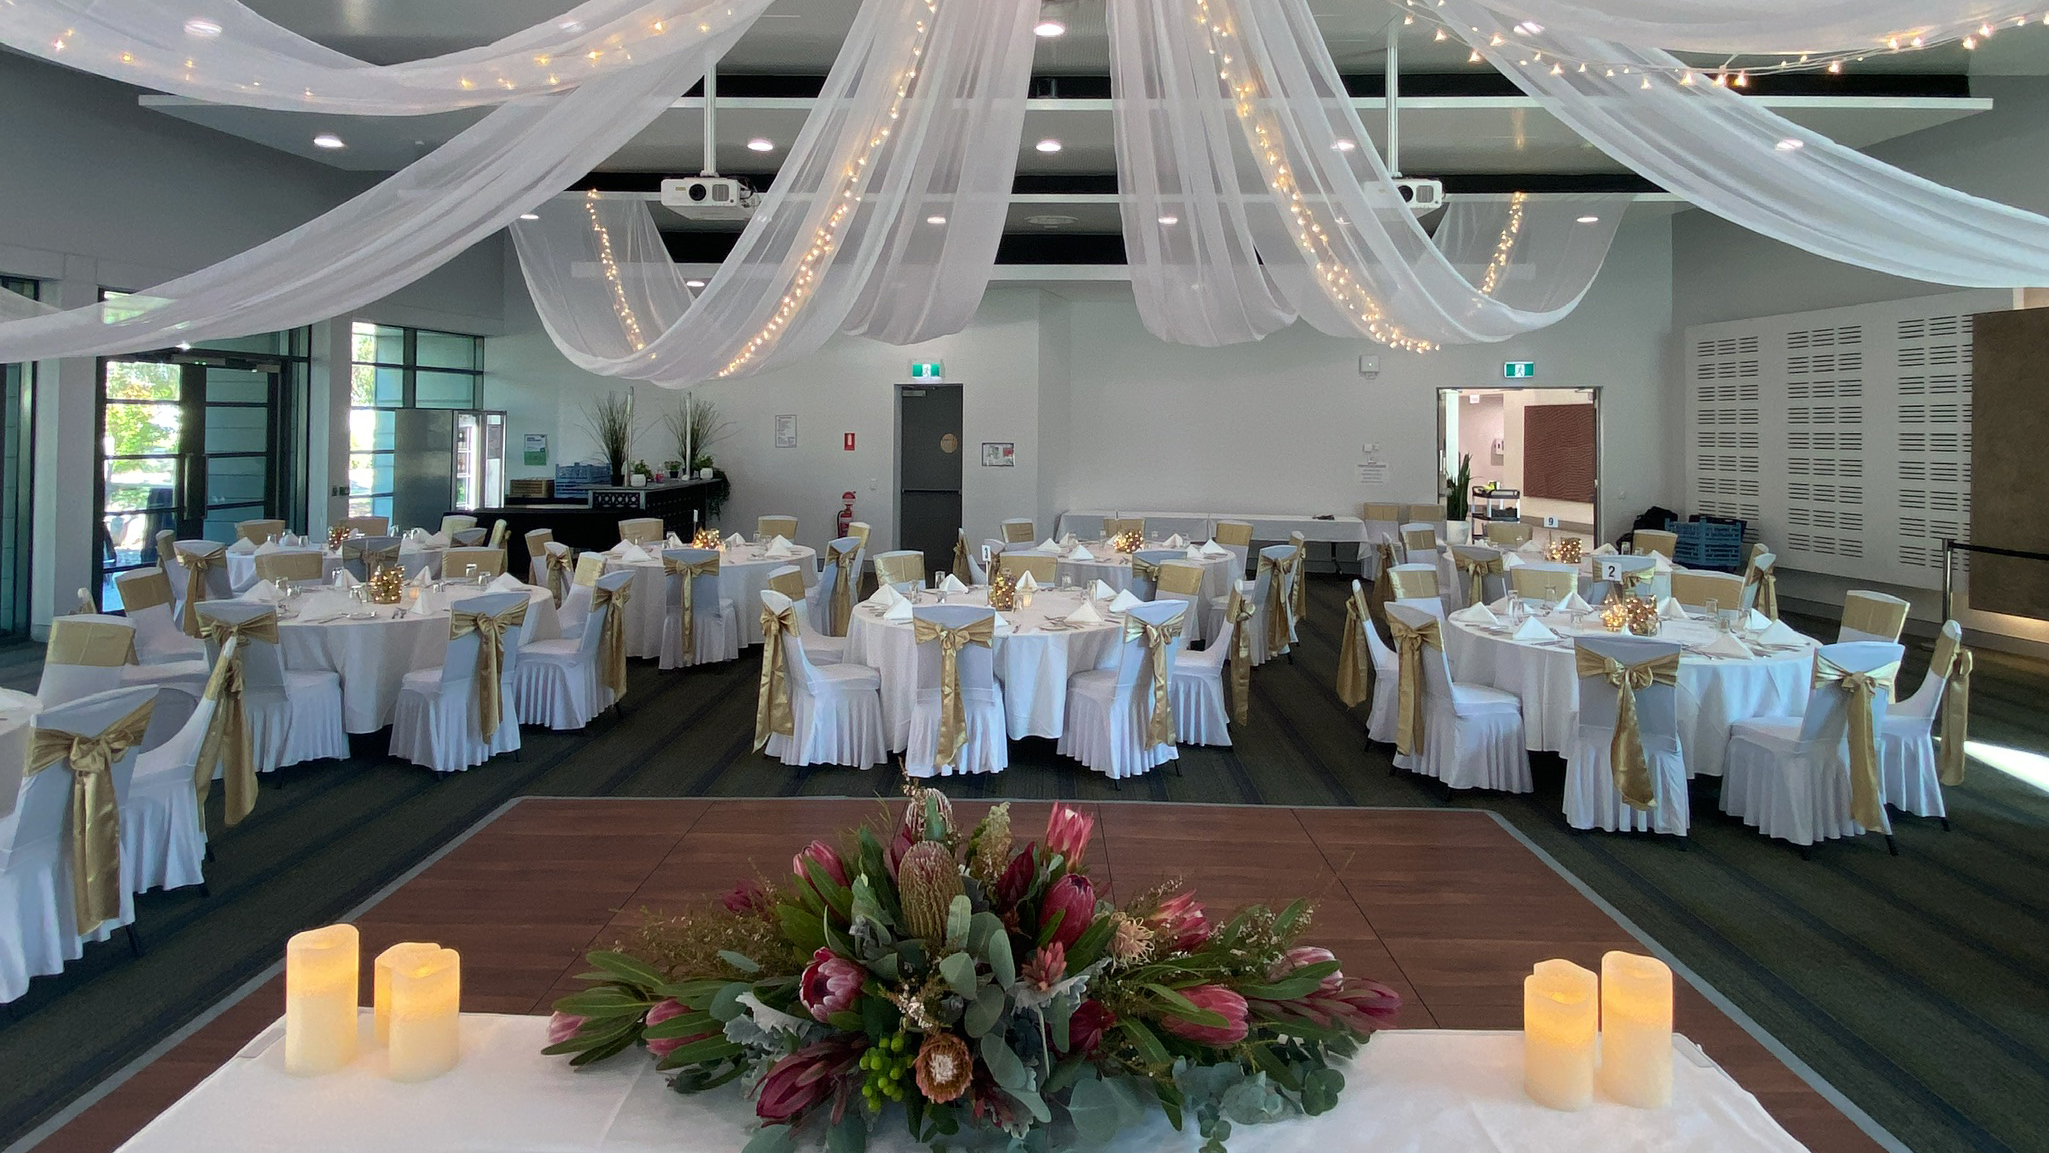 The Ann Harding Conference Centre set up for a wedding. There are multiple round tables with floral centrepieces and candles. Lighting and tulle is draped from the ceiling. 